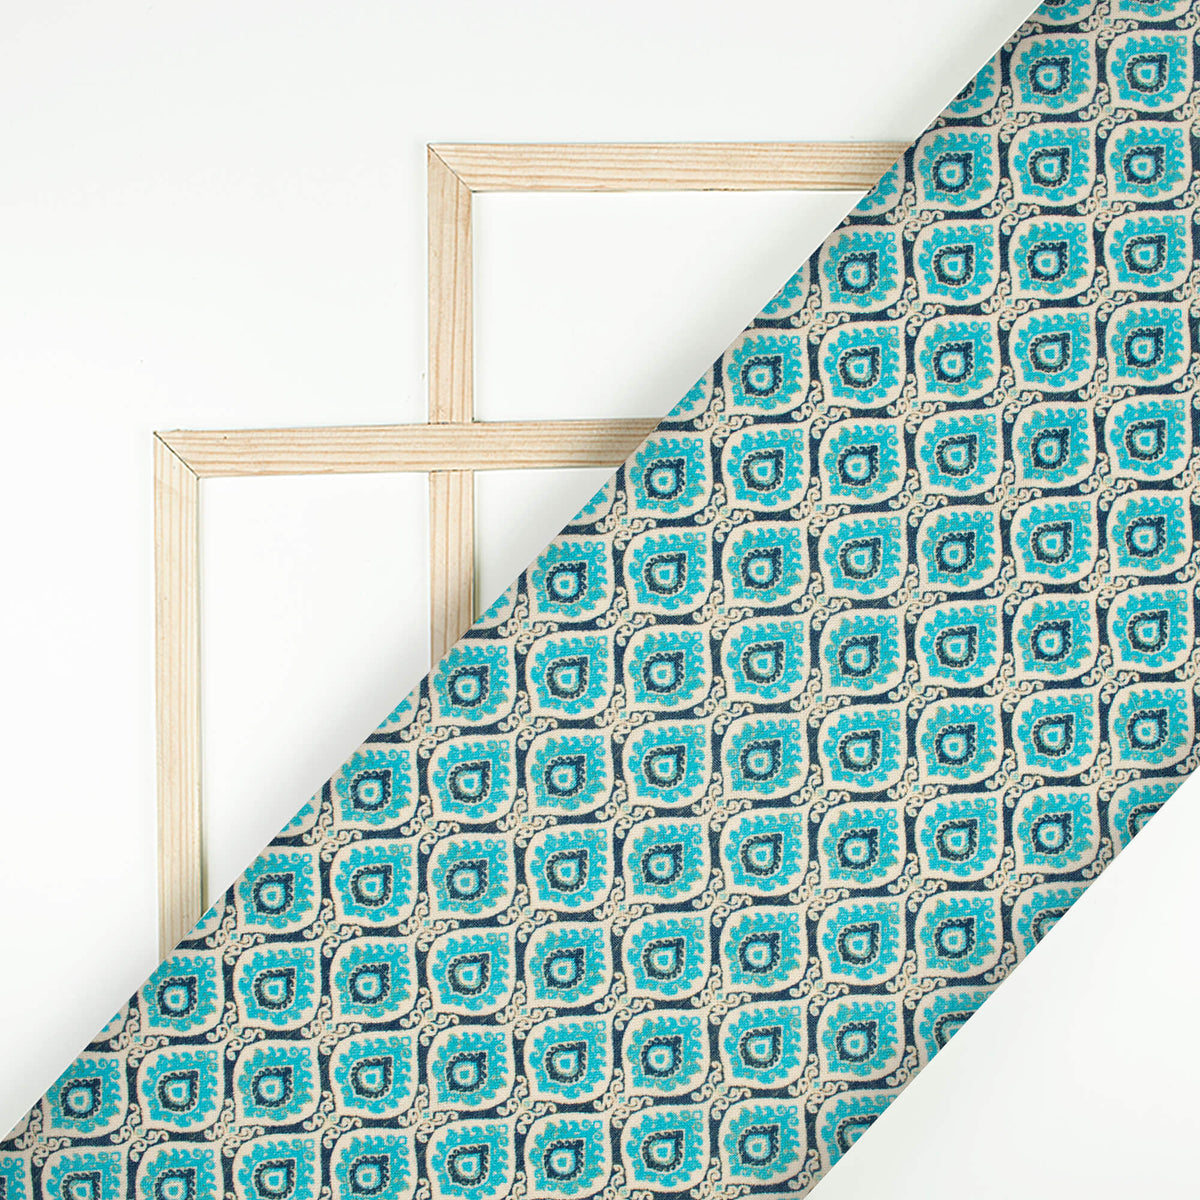 Off White And Sky Blue Trellis Pattern Digital Print Linen Textured Fabric (Width 56 Inches)